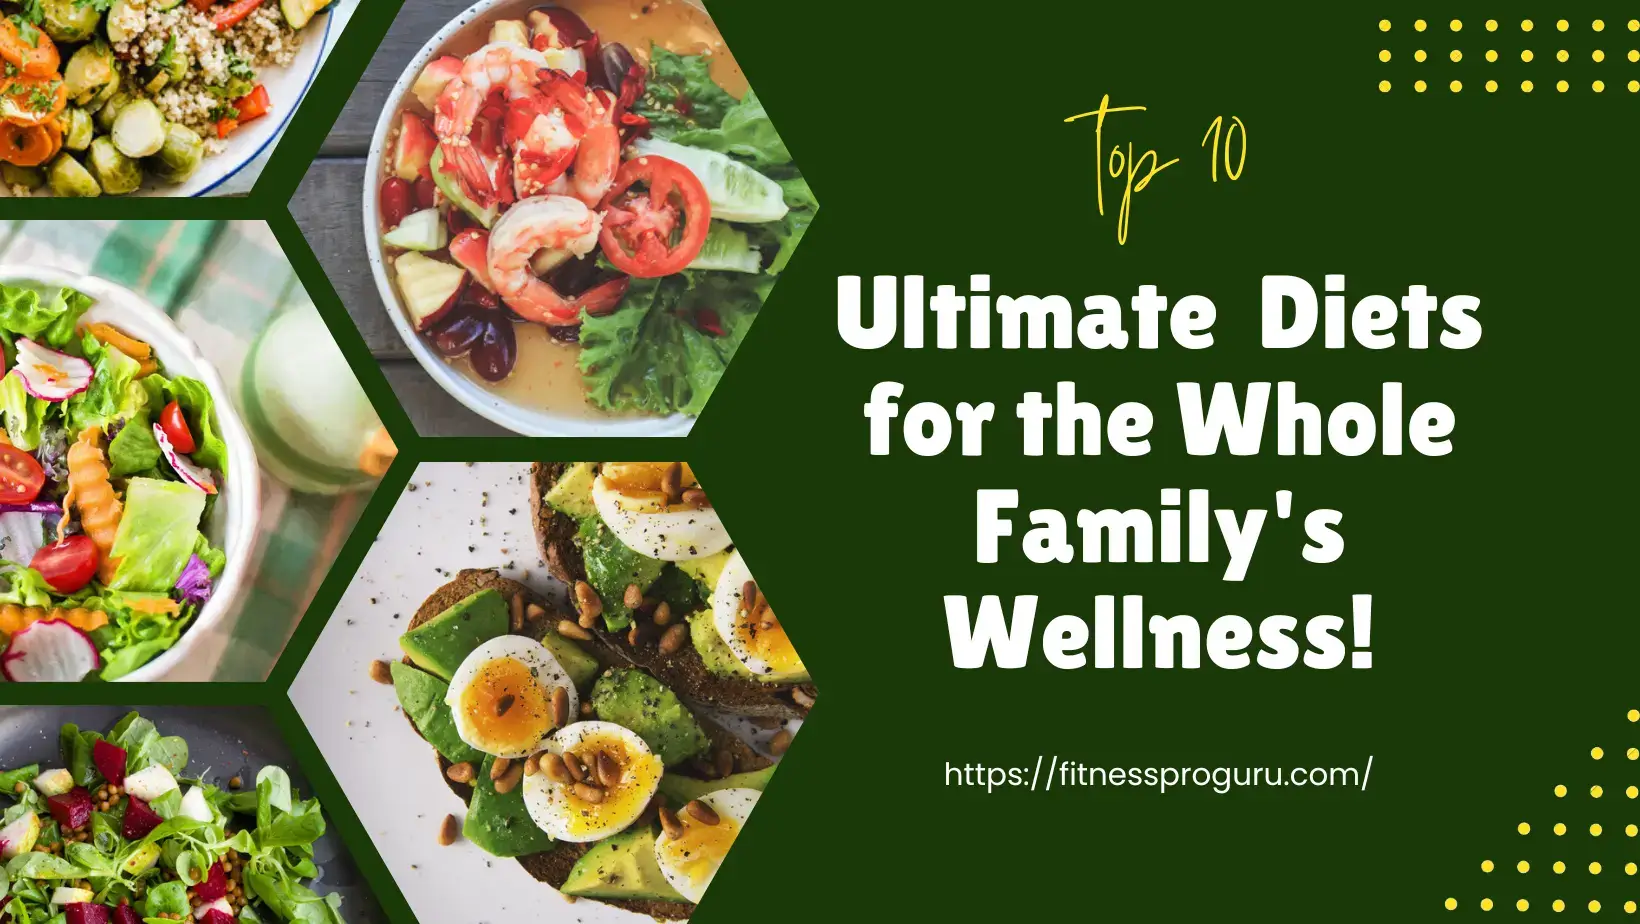 "Discover the Ultimate Top 10 Diets for the Whole Family's Wellness!"